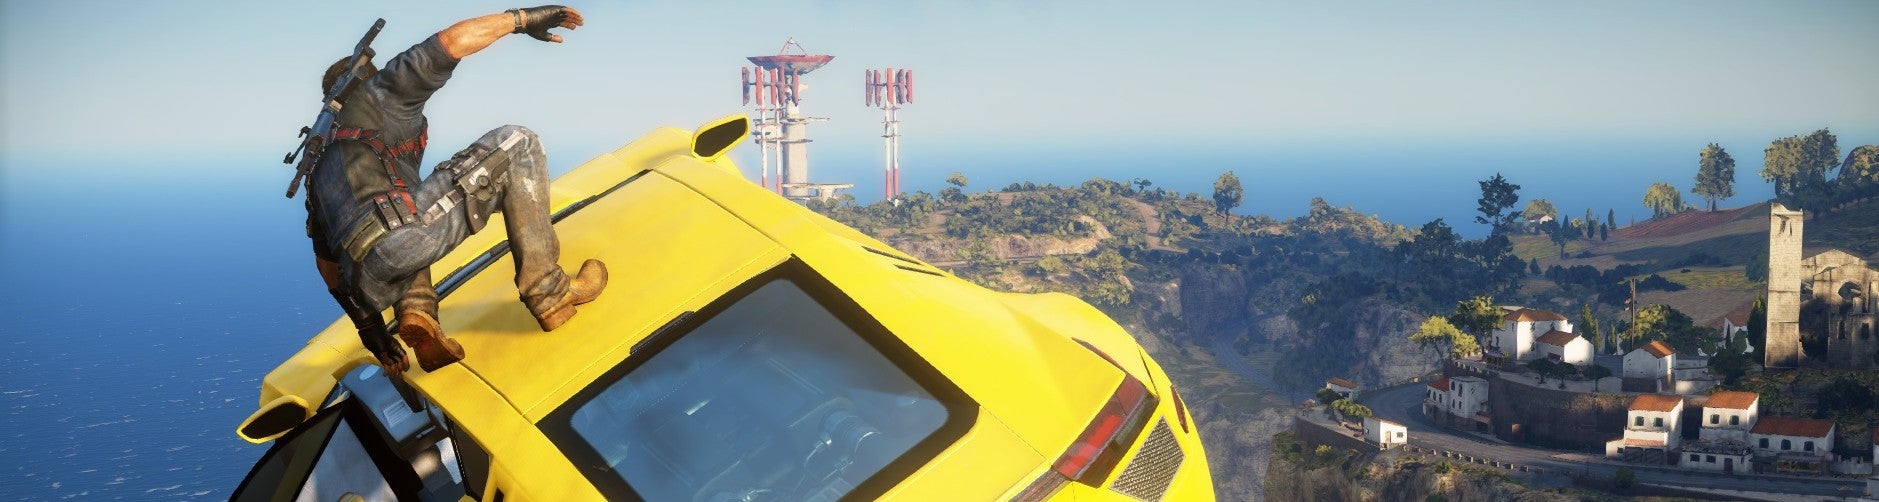 Image for Just Cause 3 Daredevil Jump Locations - Vehicle Unlocks